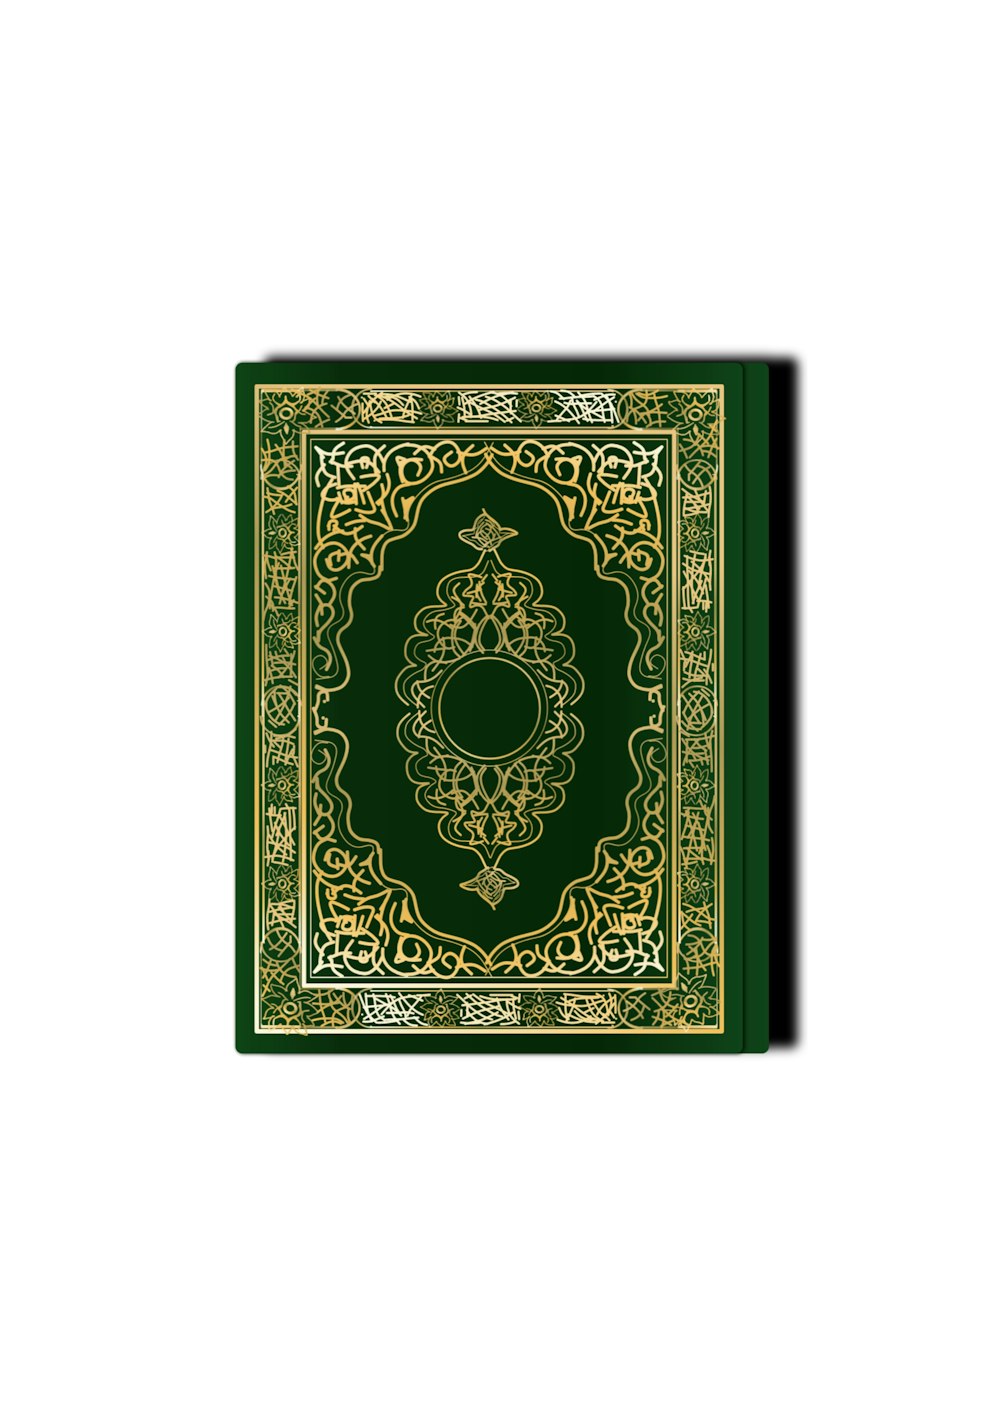 a green and gold book with a gold border